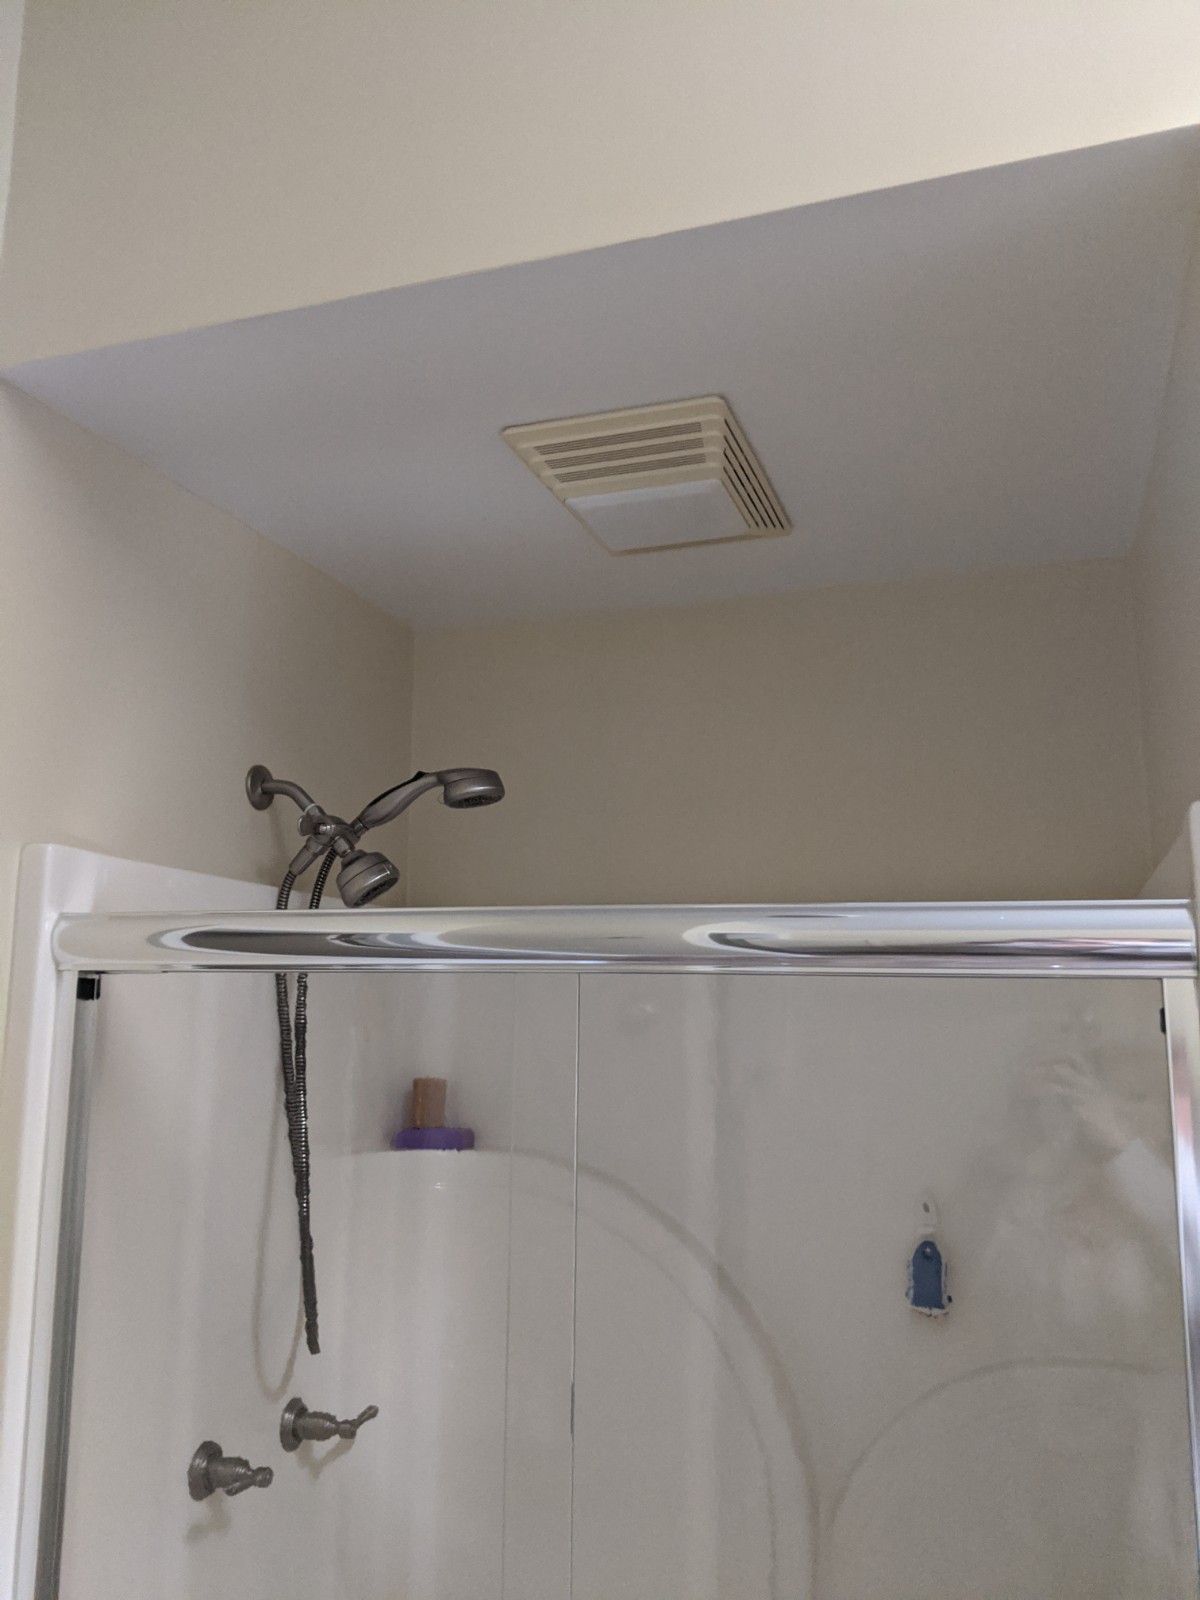 This is a before picture of a shower with just a surround